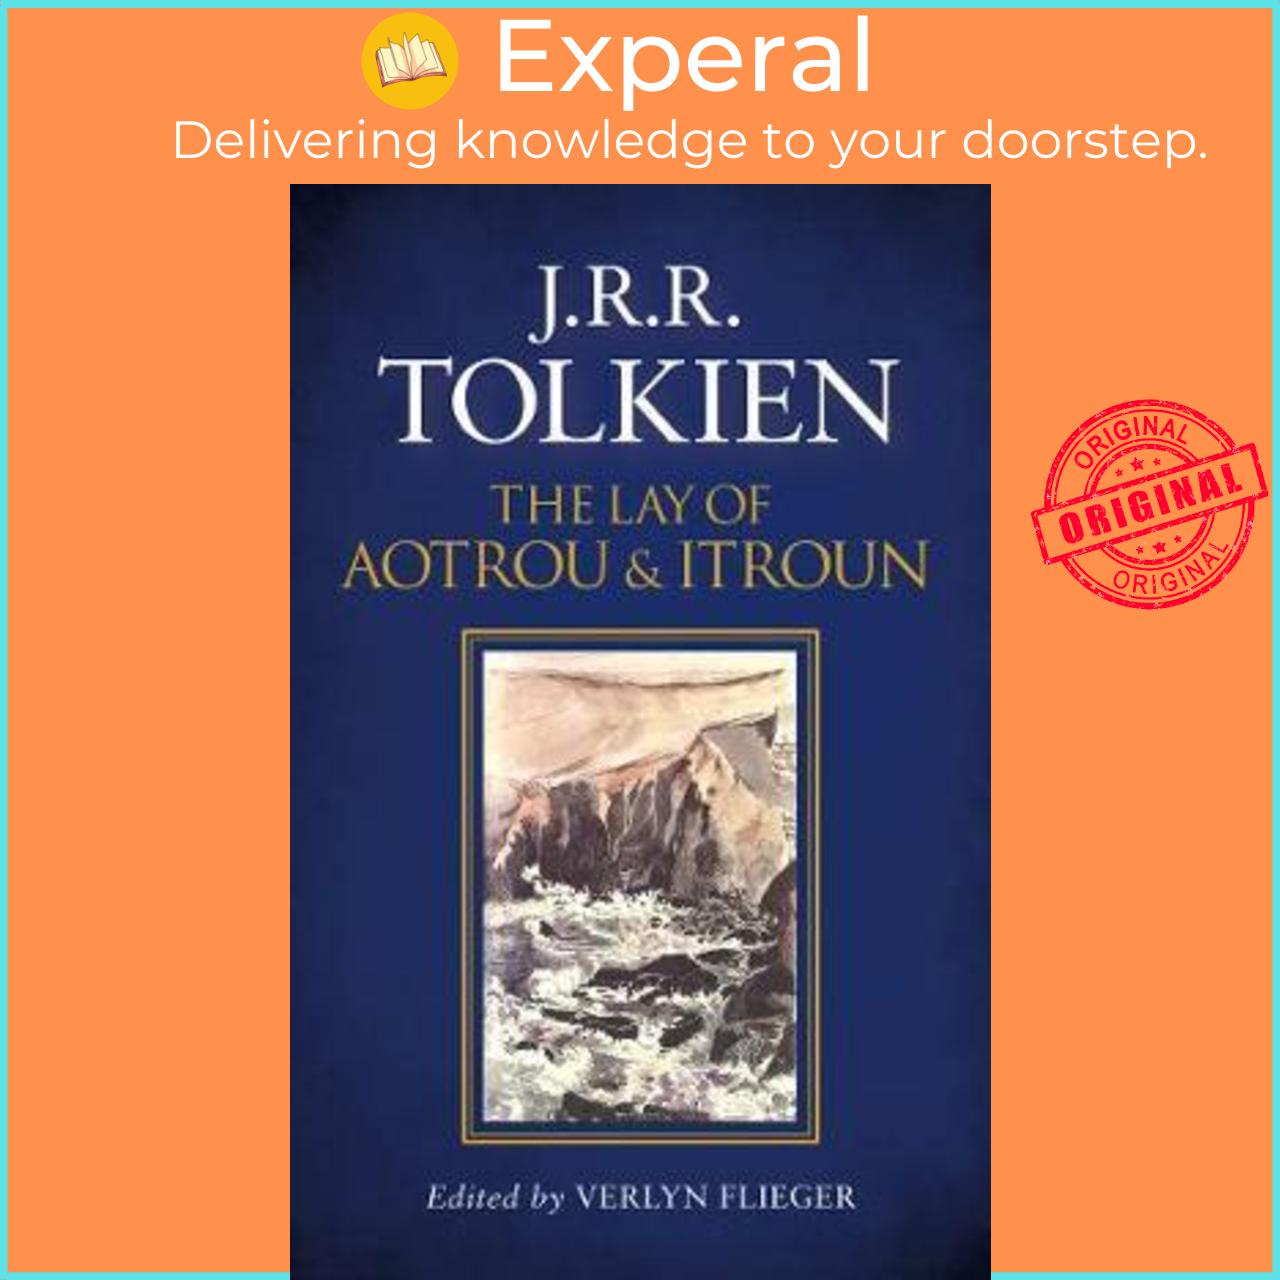 Sách - The Lay of Aotrou and Itroun by J. R. R. Tolkien Verlyn Flieger (UK edition, paperback)